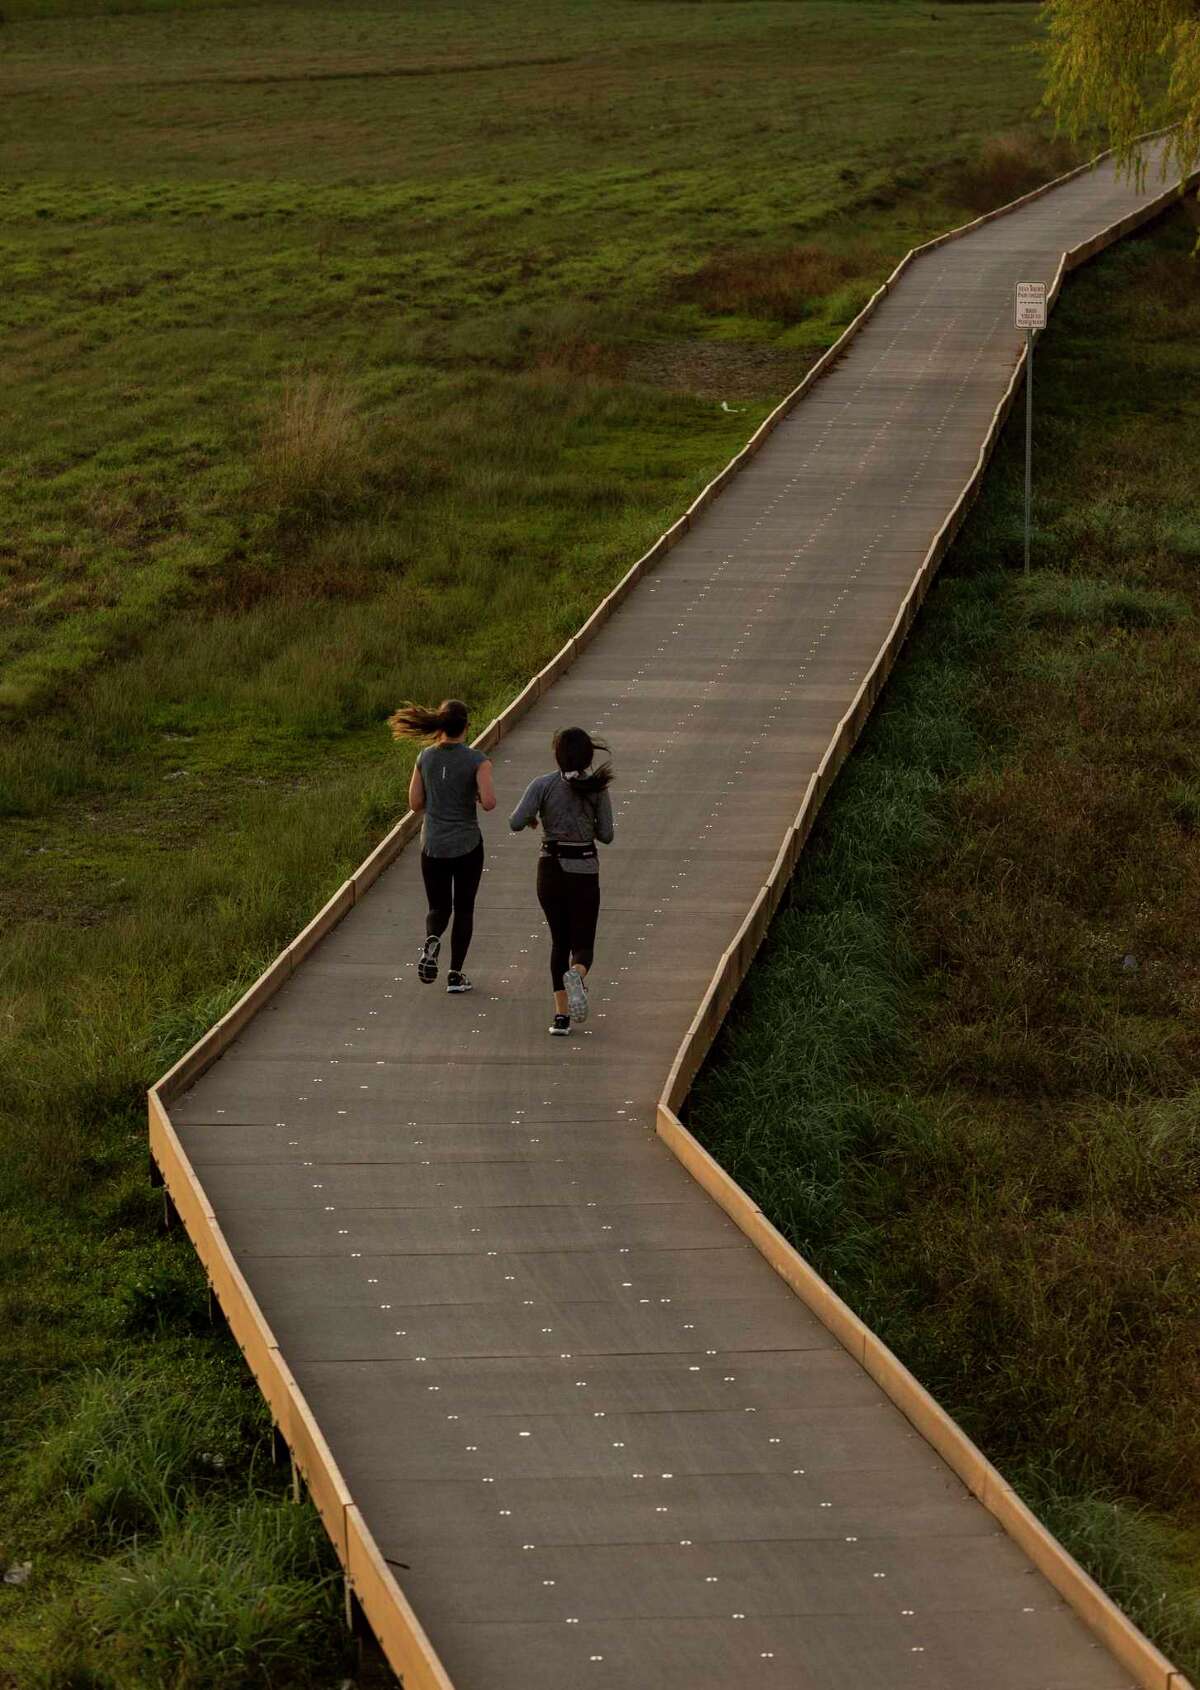 Two joggers enjoy a run along the Salado Creek section of the Howard W. Peak Greenway Trail System.